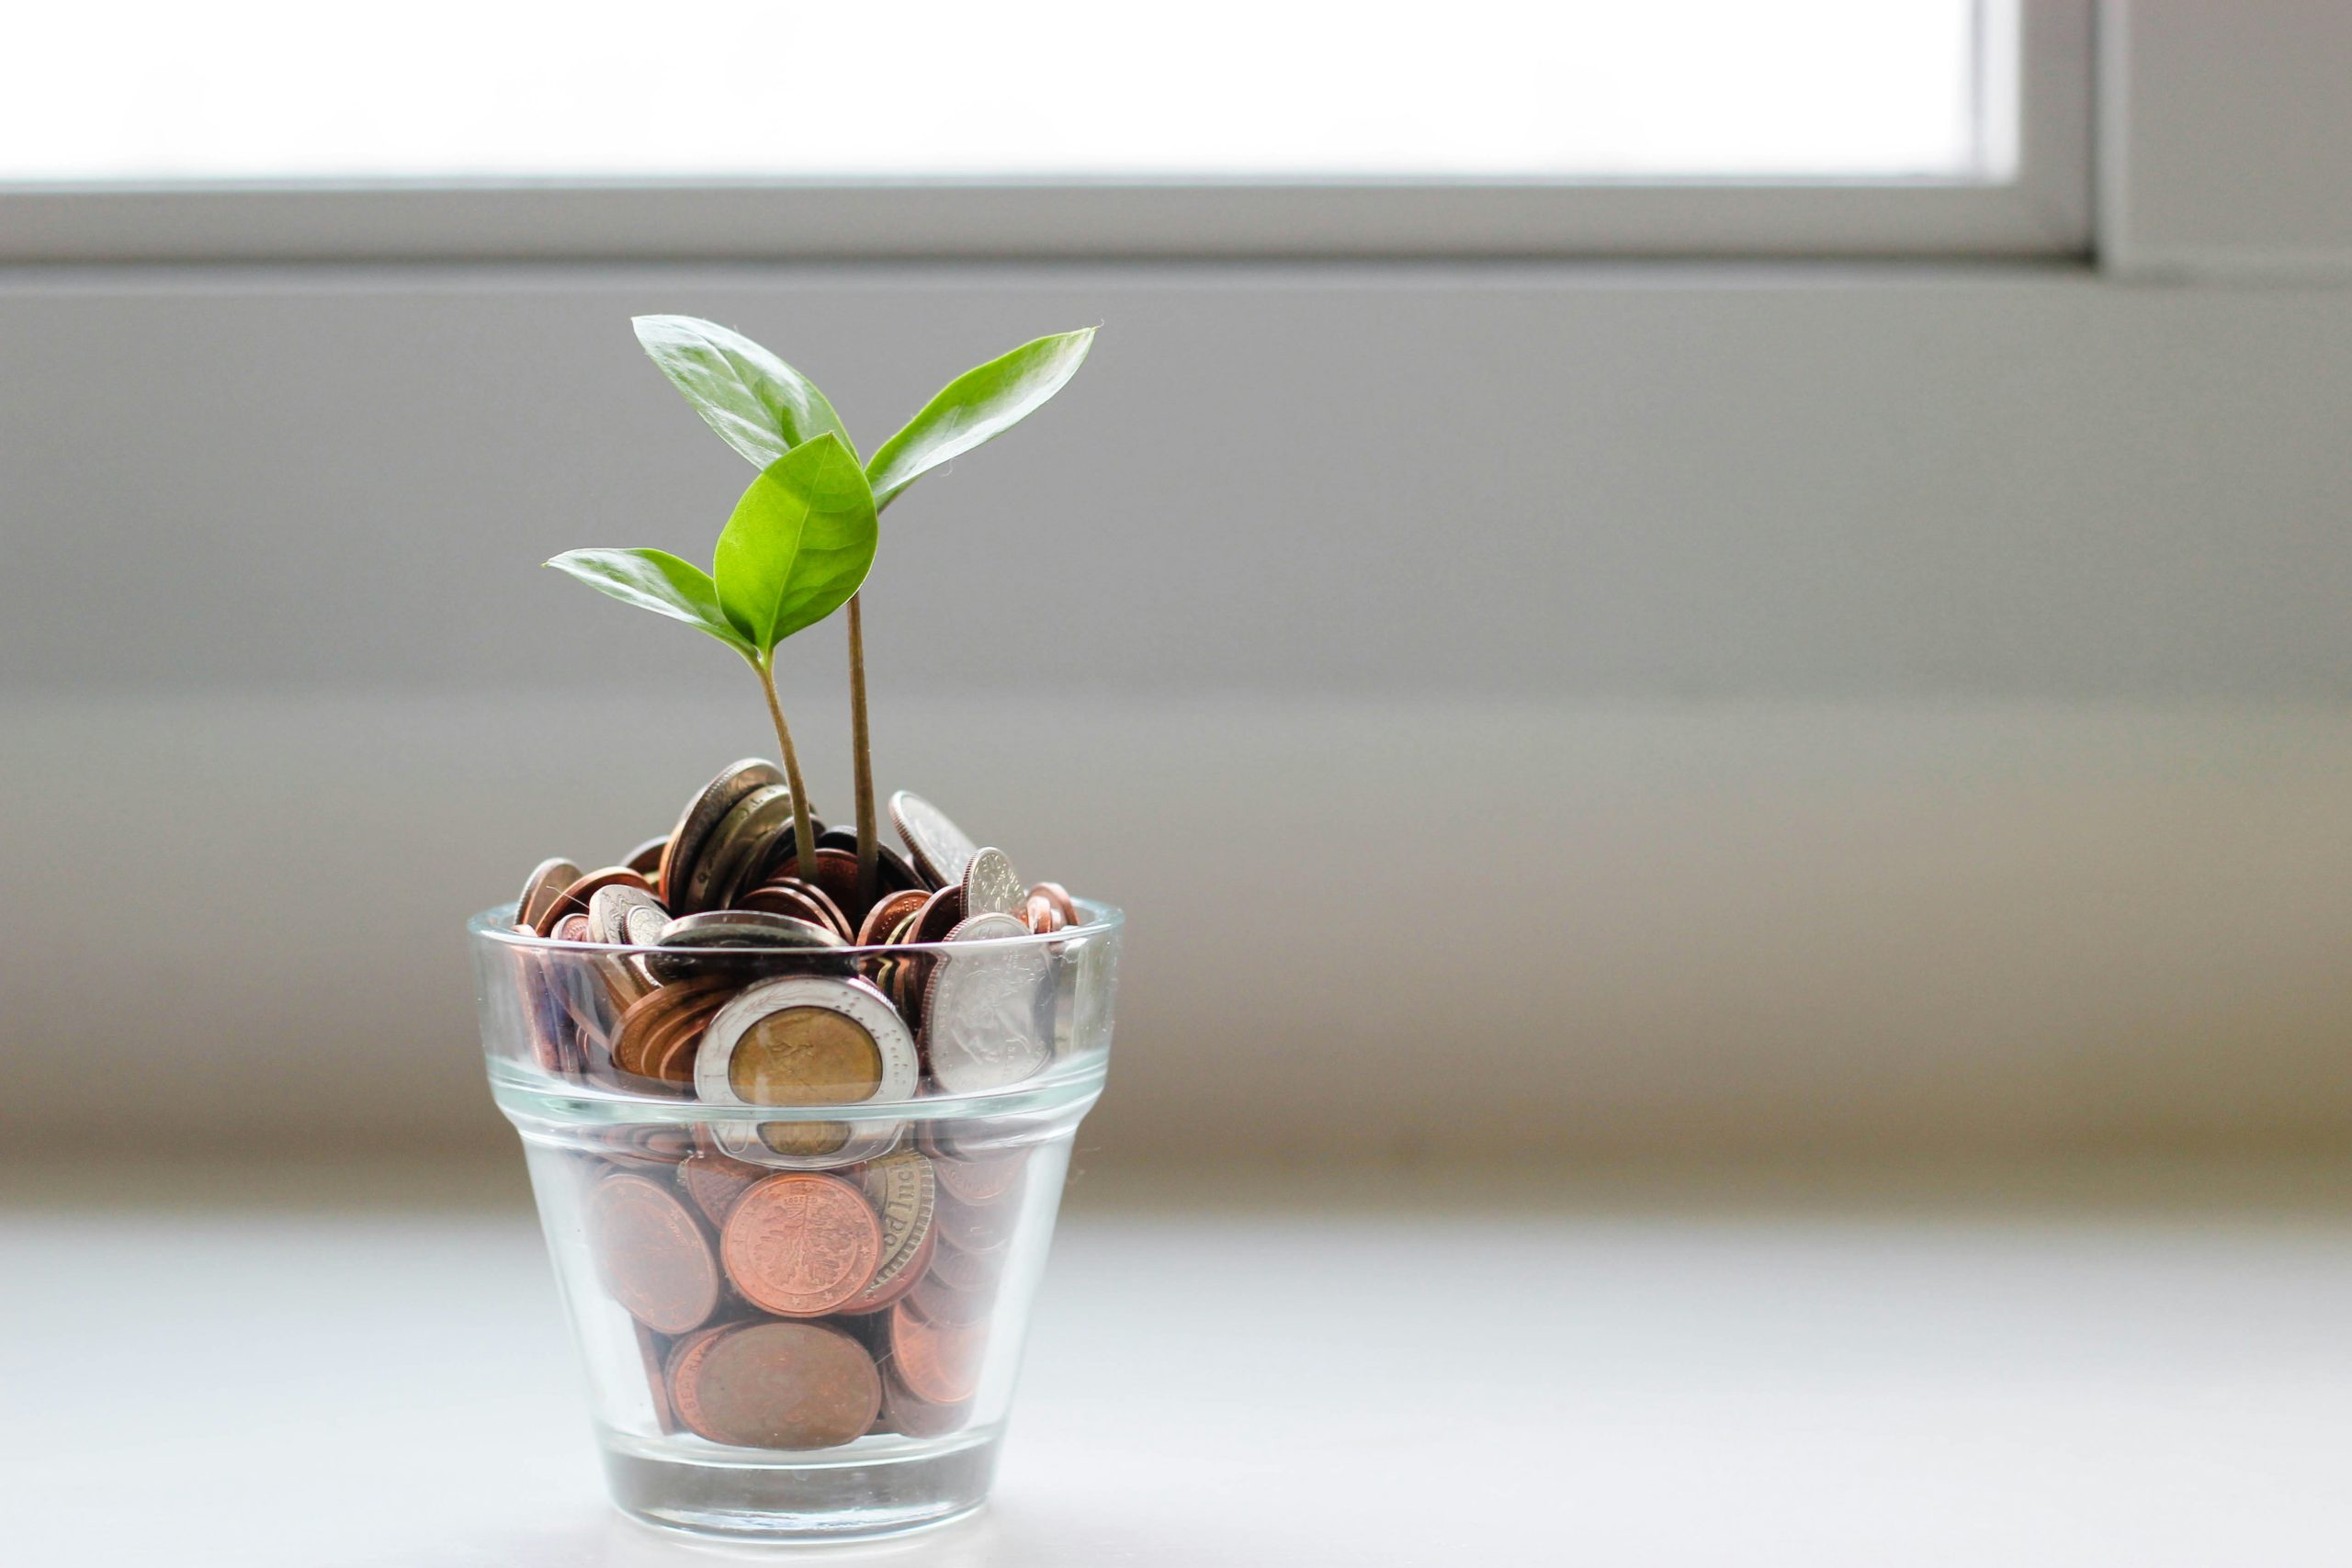 coins in a jar with a plant sprouting out